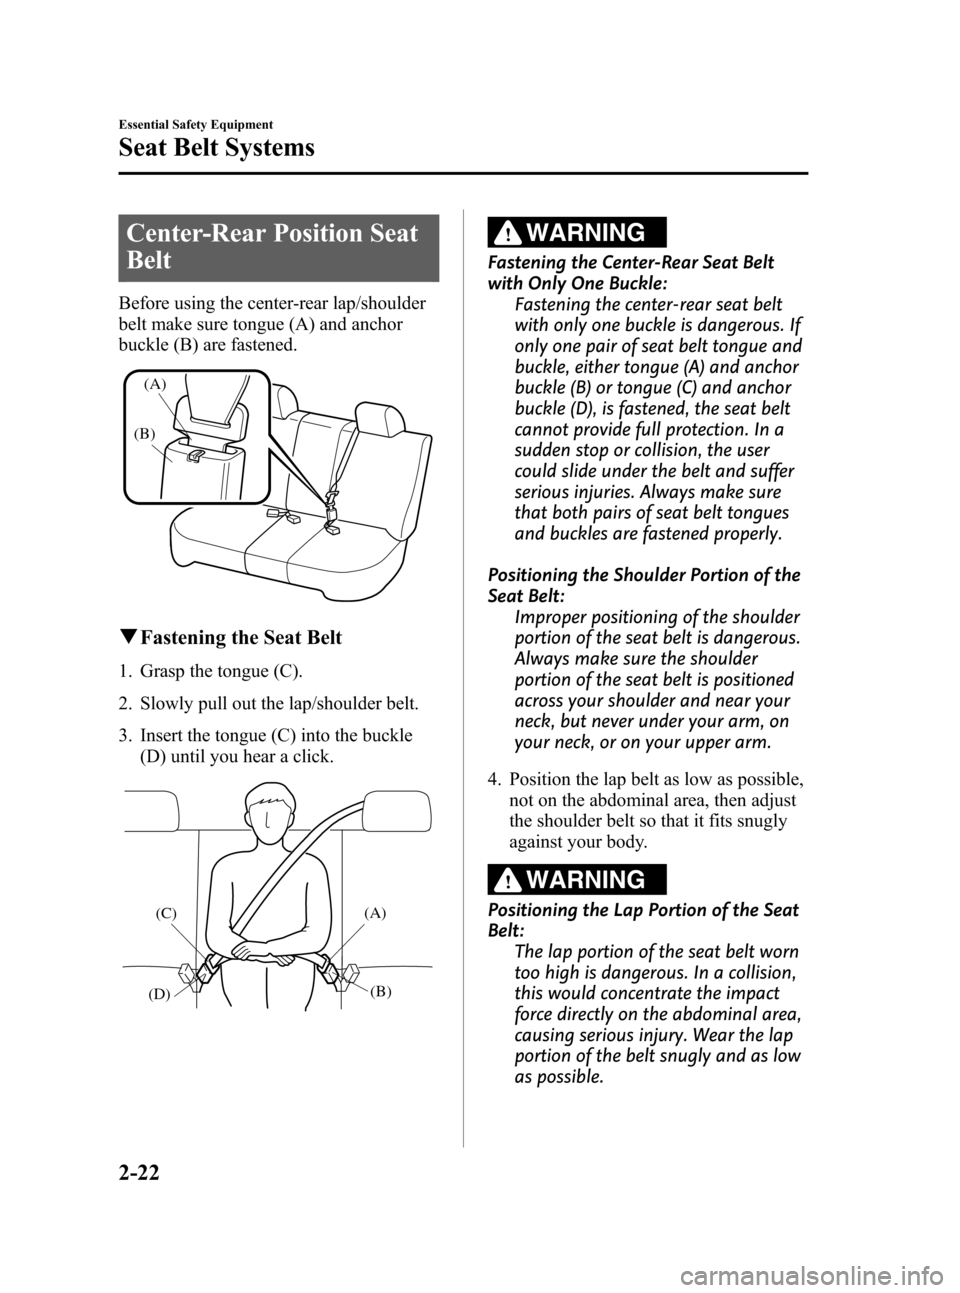 MAZDA MODEL CX-7 2009   (in English) Owners Guide Black plate (34,1)
Center-Rear Position Seat
Belt
Before using the center-rear lap/shoulder
belt make sure tongue (A) and anchor
buckle (B) are fastened.
(A)
(B)
qFastening the Seat Belt
1. Grasp the 